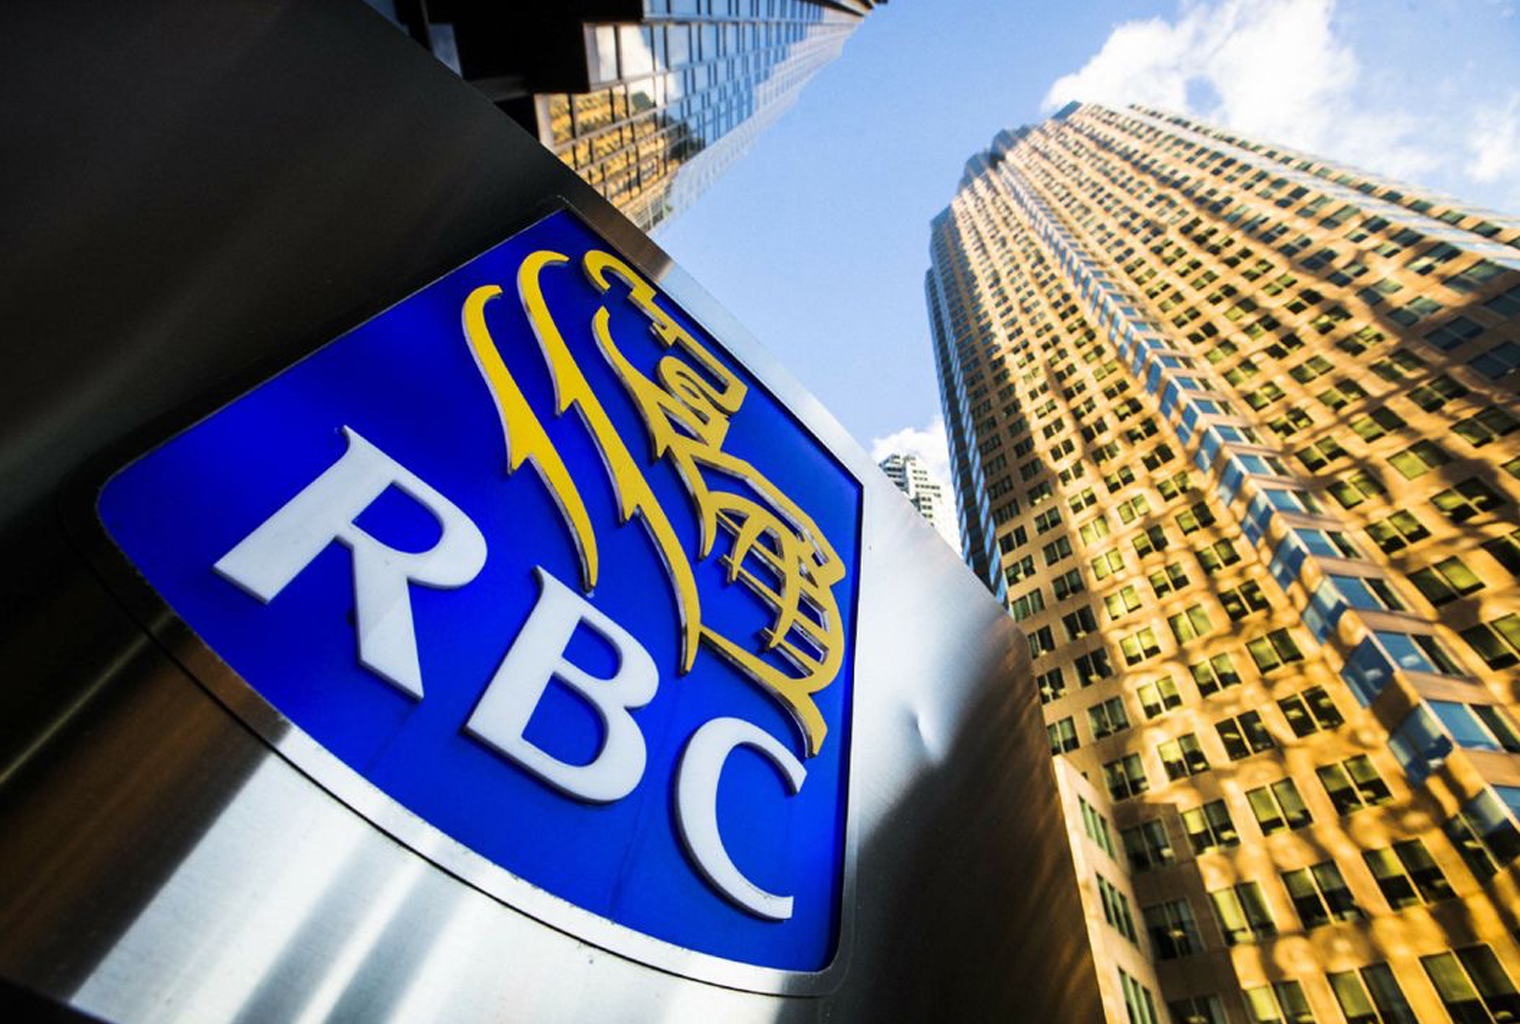 Royal Bank of Canada Patents Point to Crypto Exchange Launch